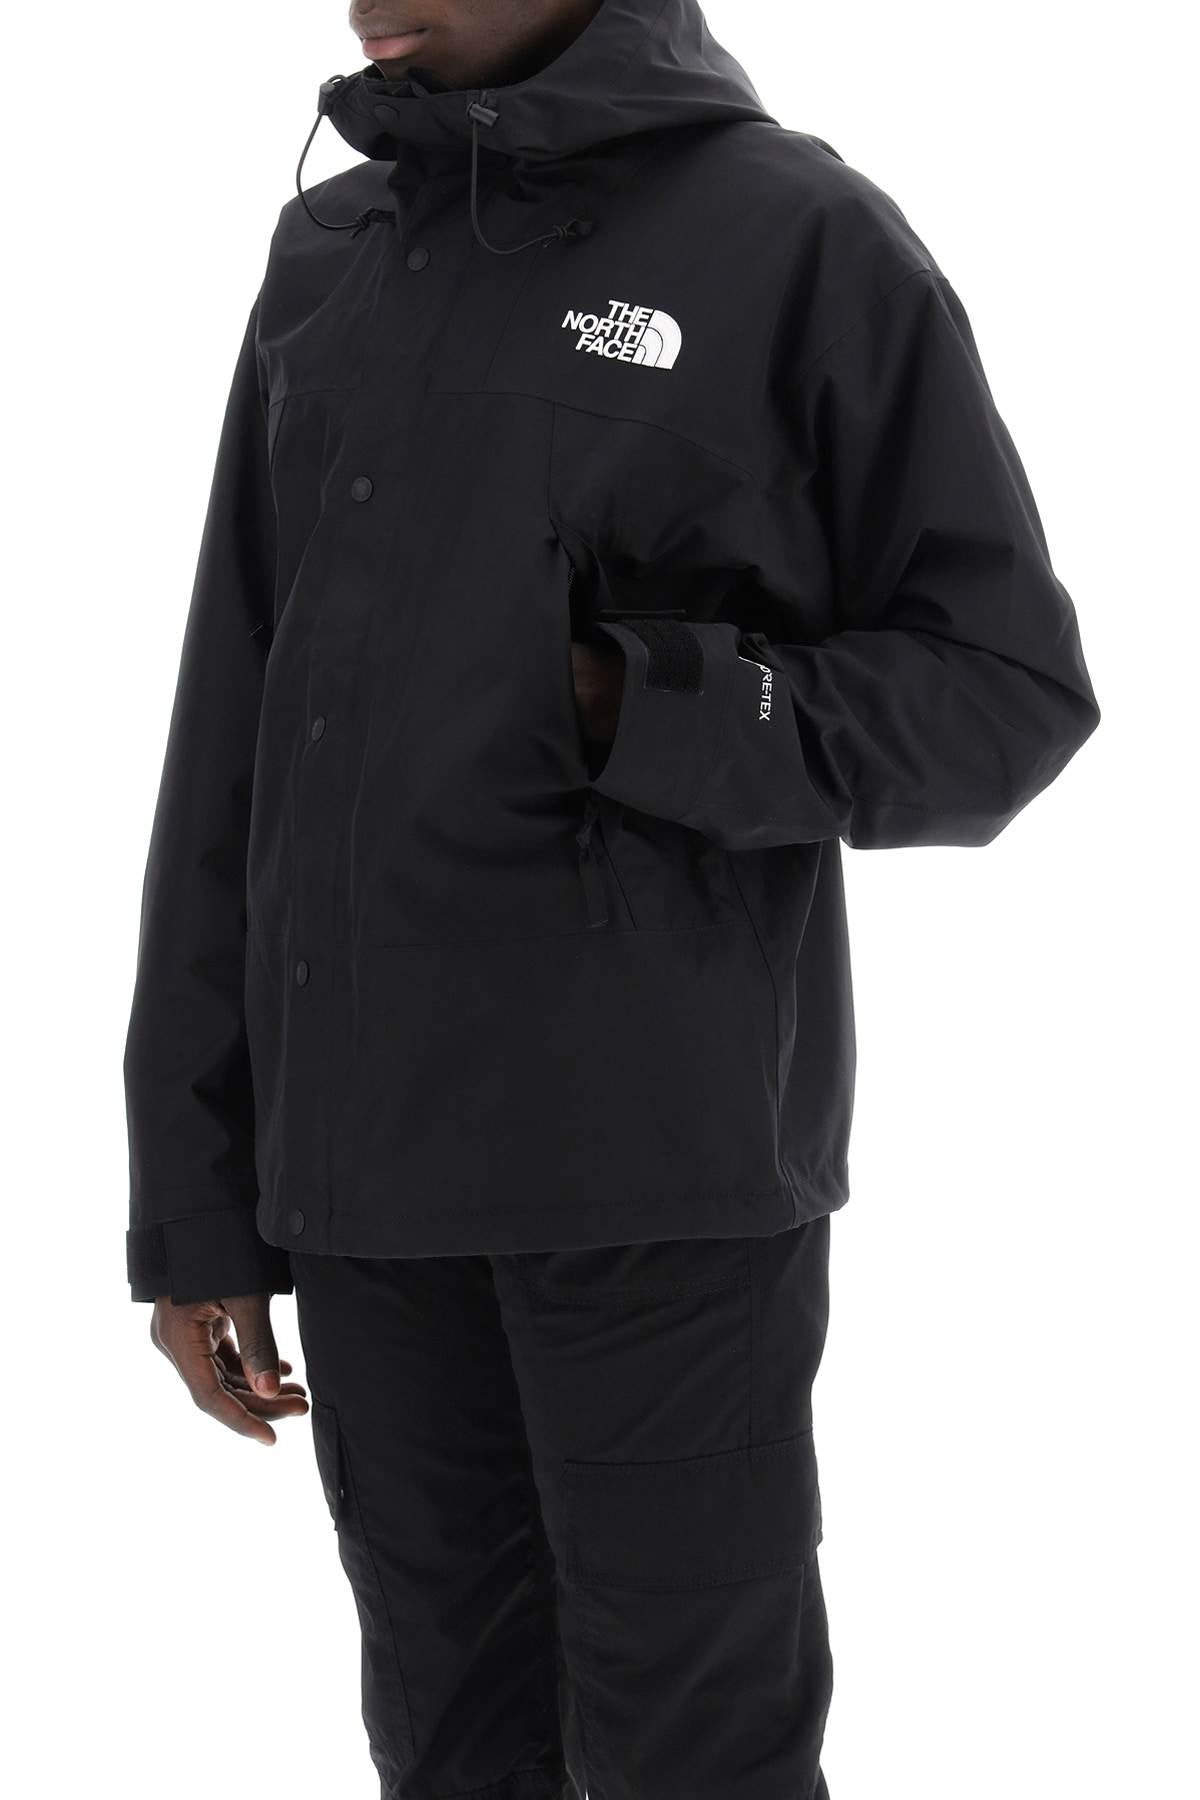 The north face mountain gore-tex jacket-3